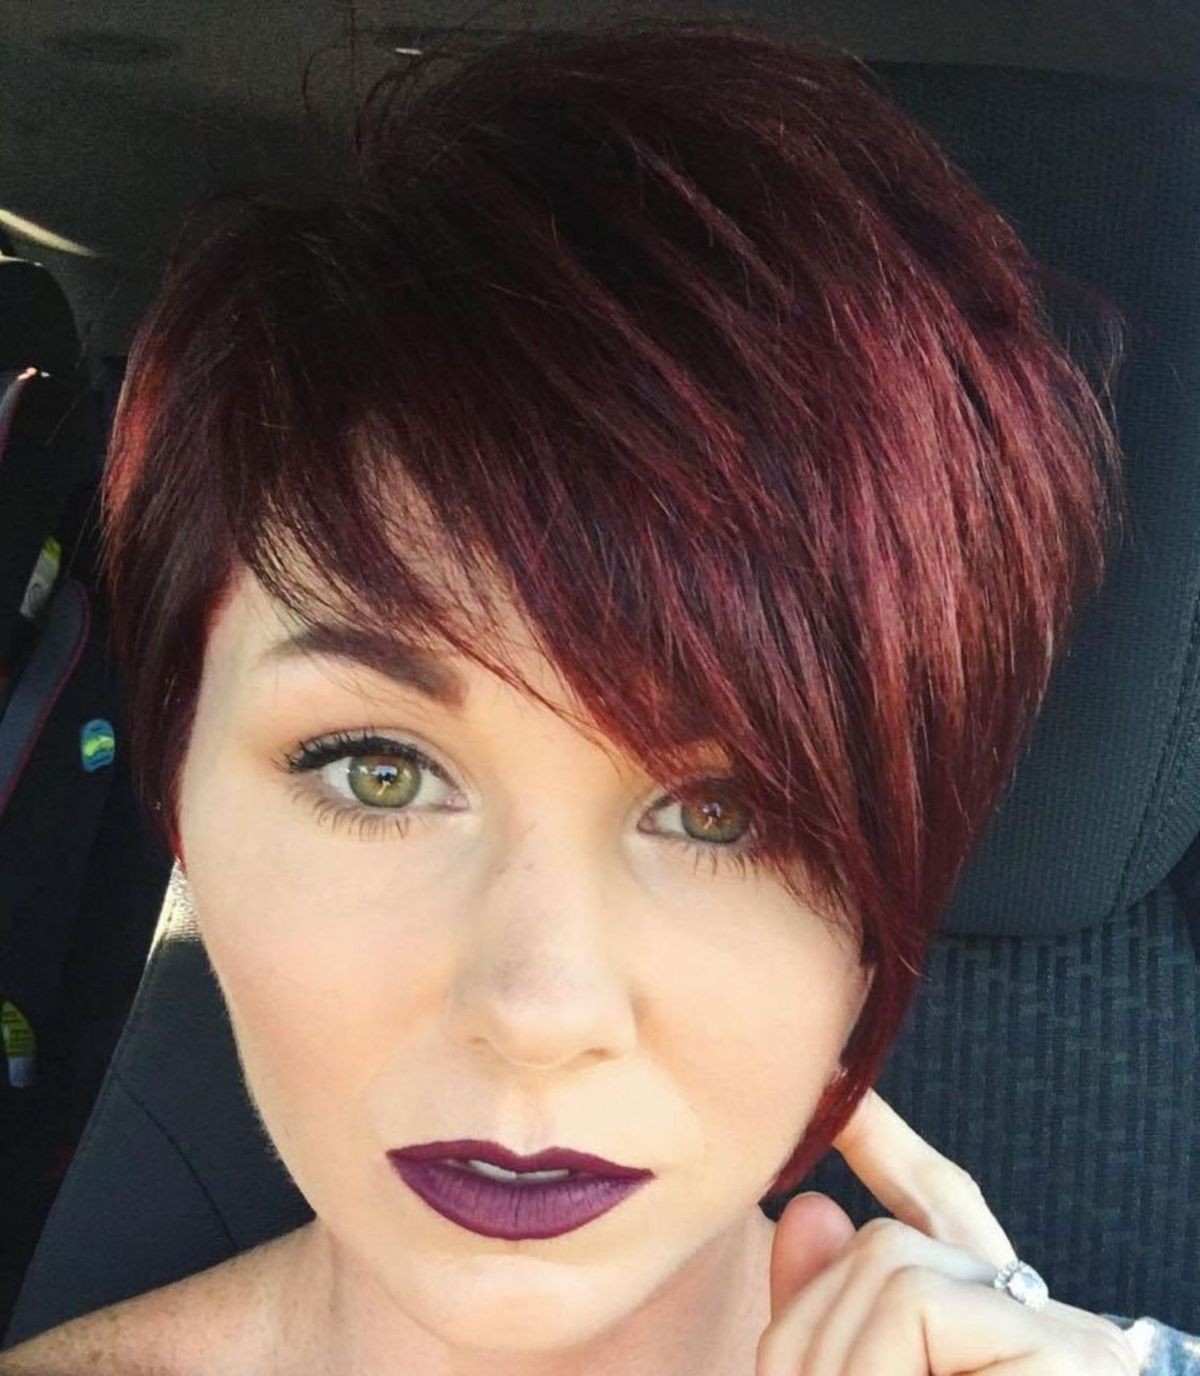 7 Best Pixie Haircuts for Young Women in Any Ocassion 6a4c432ca913cacc89d9c956c32de2c7